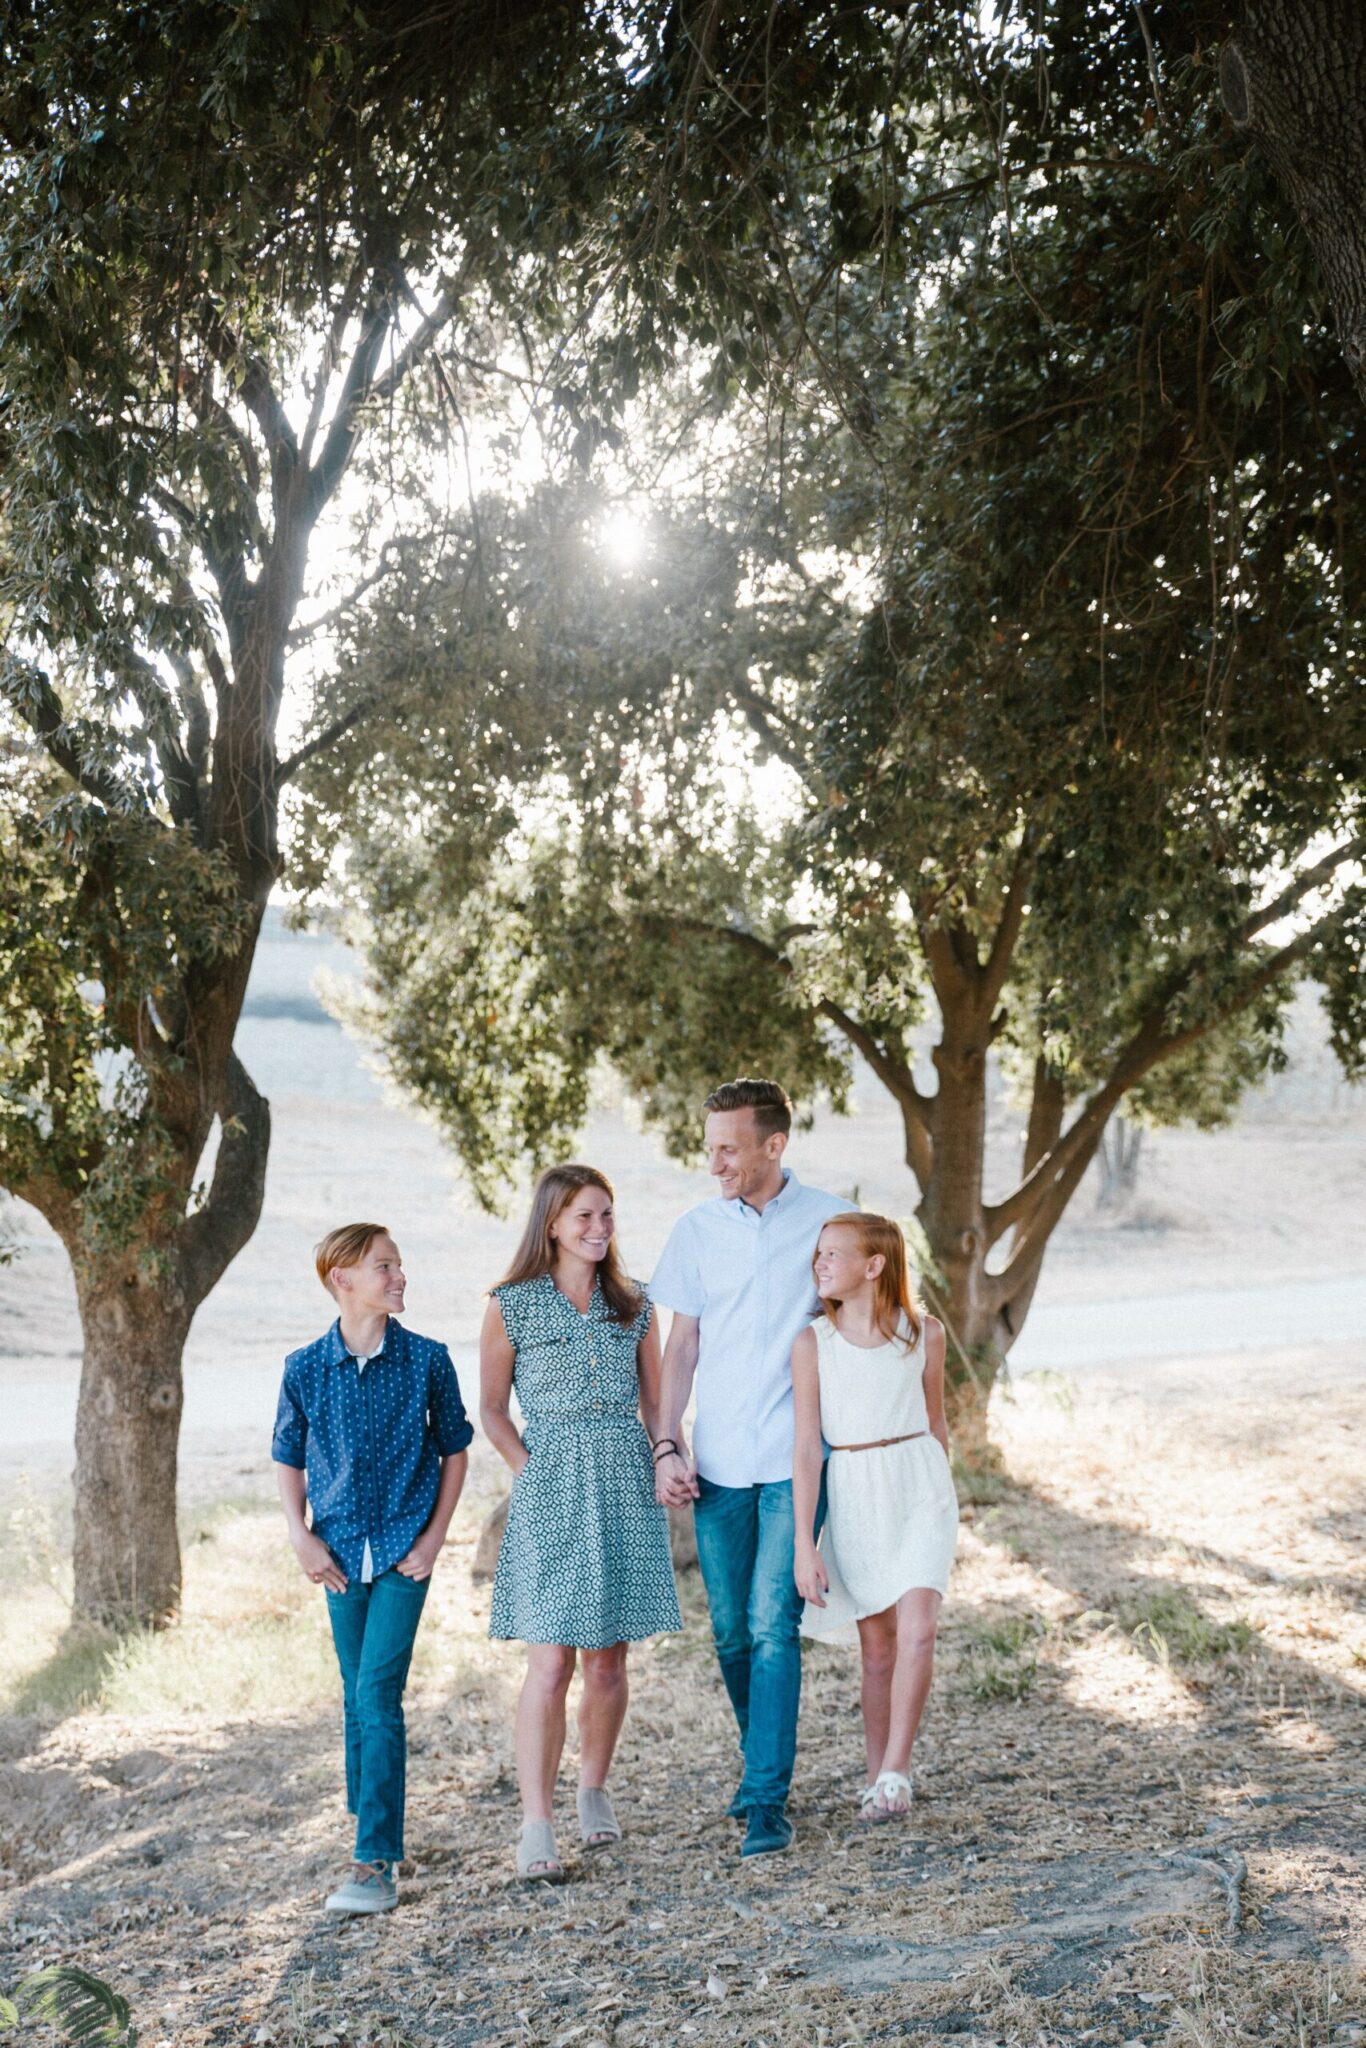 A family of four walking hand in hand under trees with sunlight filtering through the leaves, heading toward their appointment at the local Texas dentistry office.